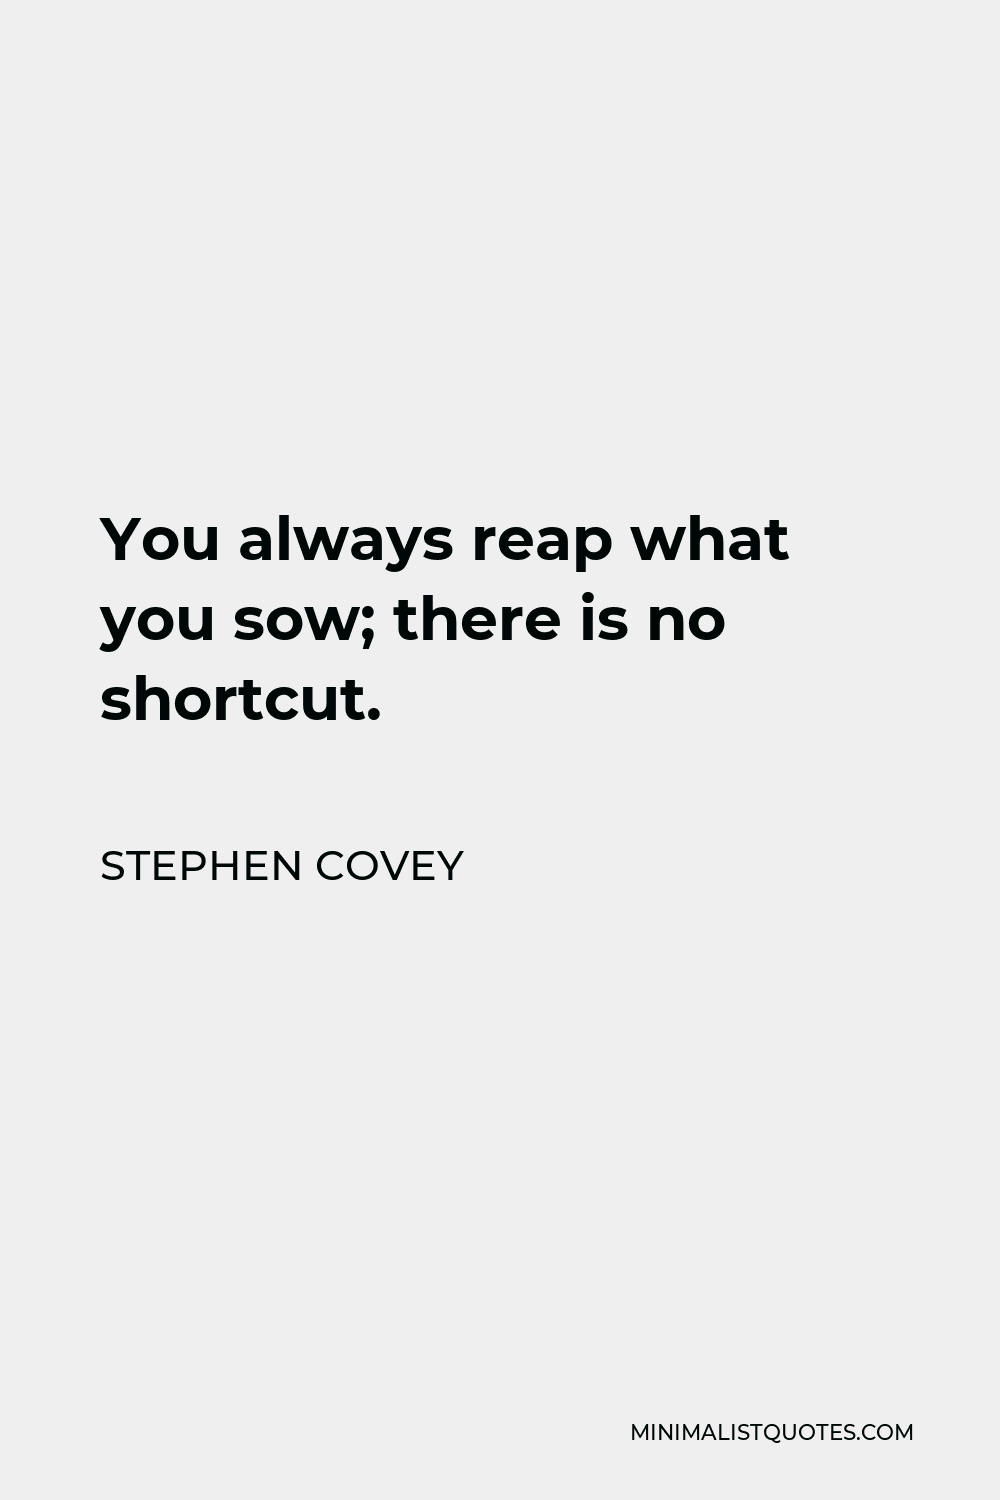 Stephen Covey Quote - You always reap what you sow; there is no shortcut.